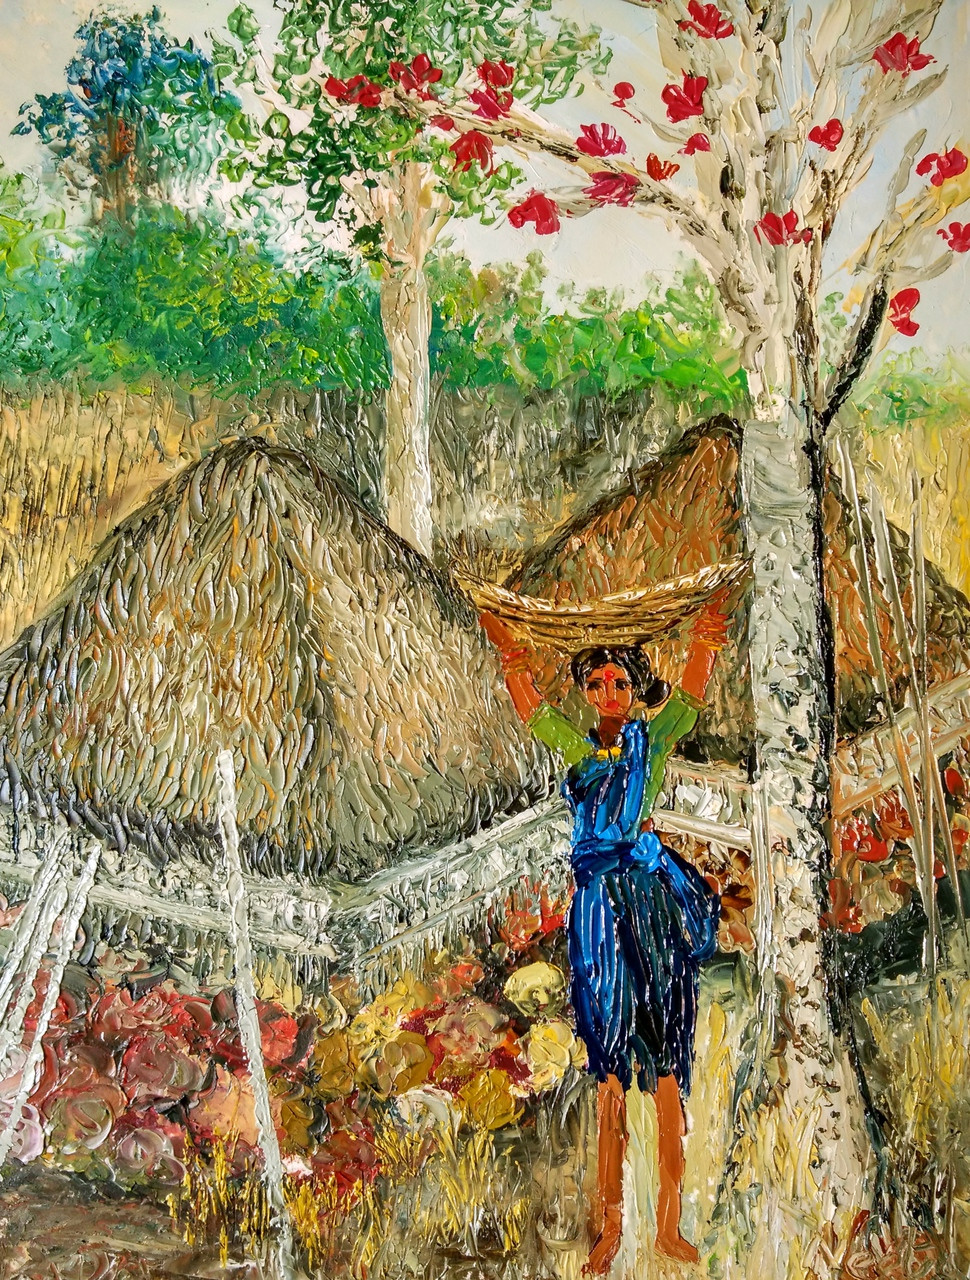 life in village with beautiful art — Steemit